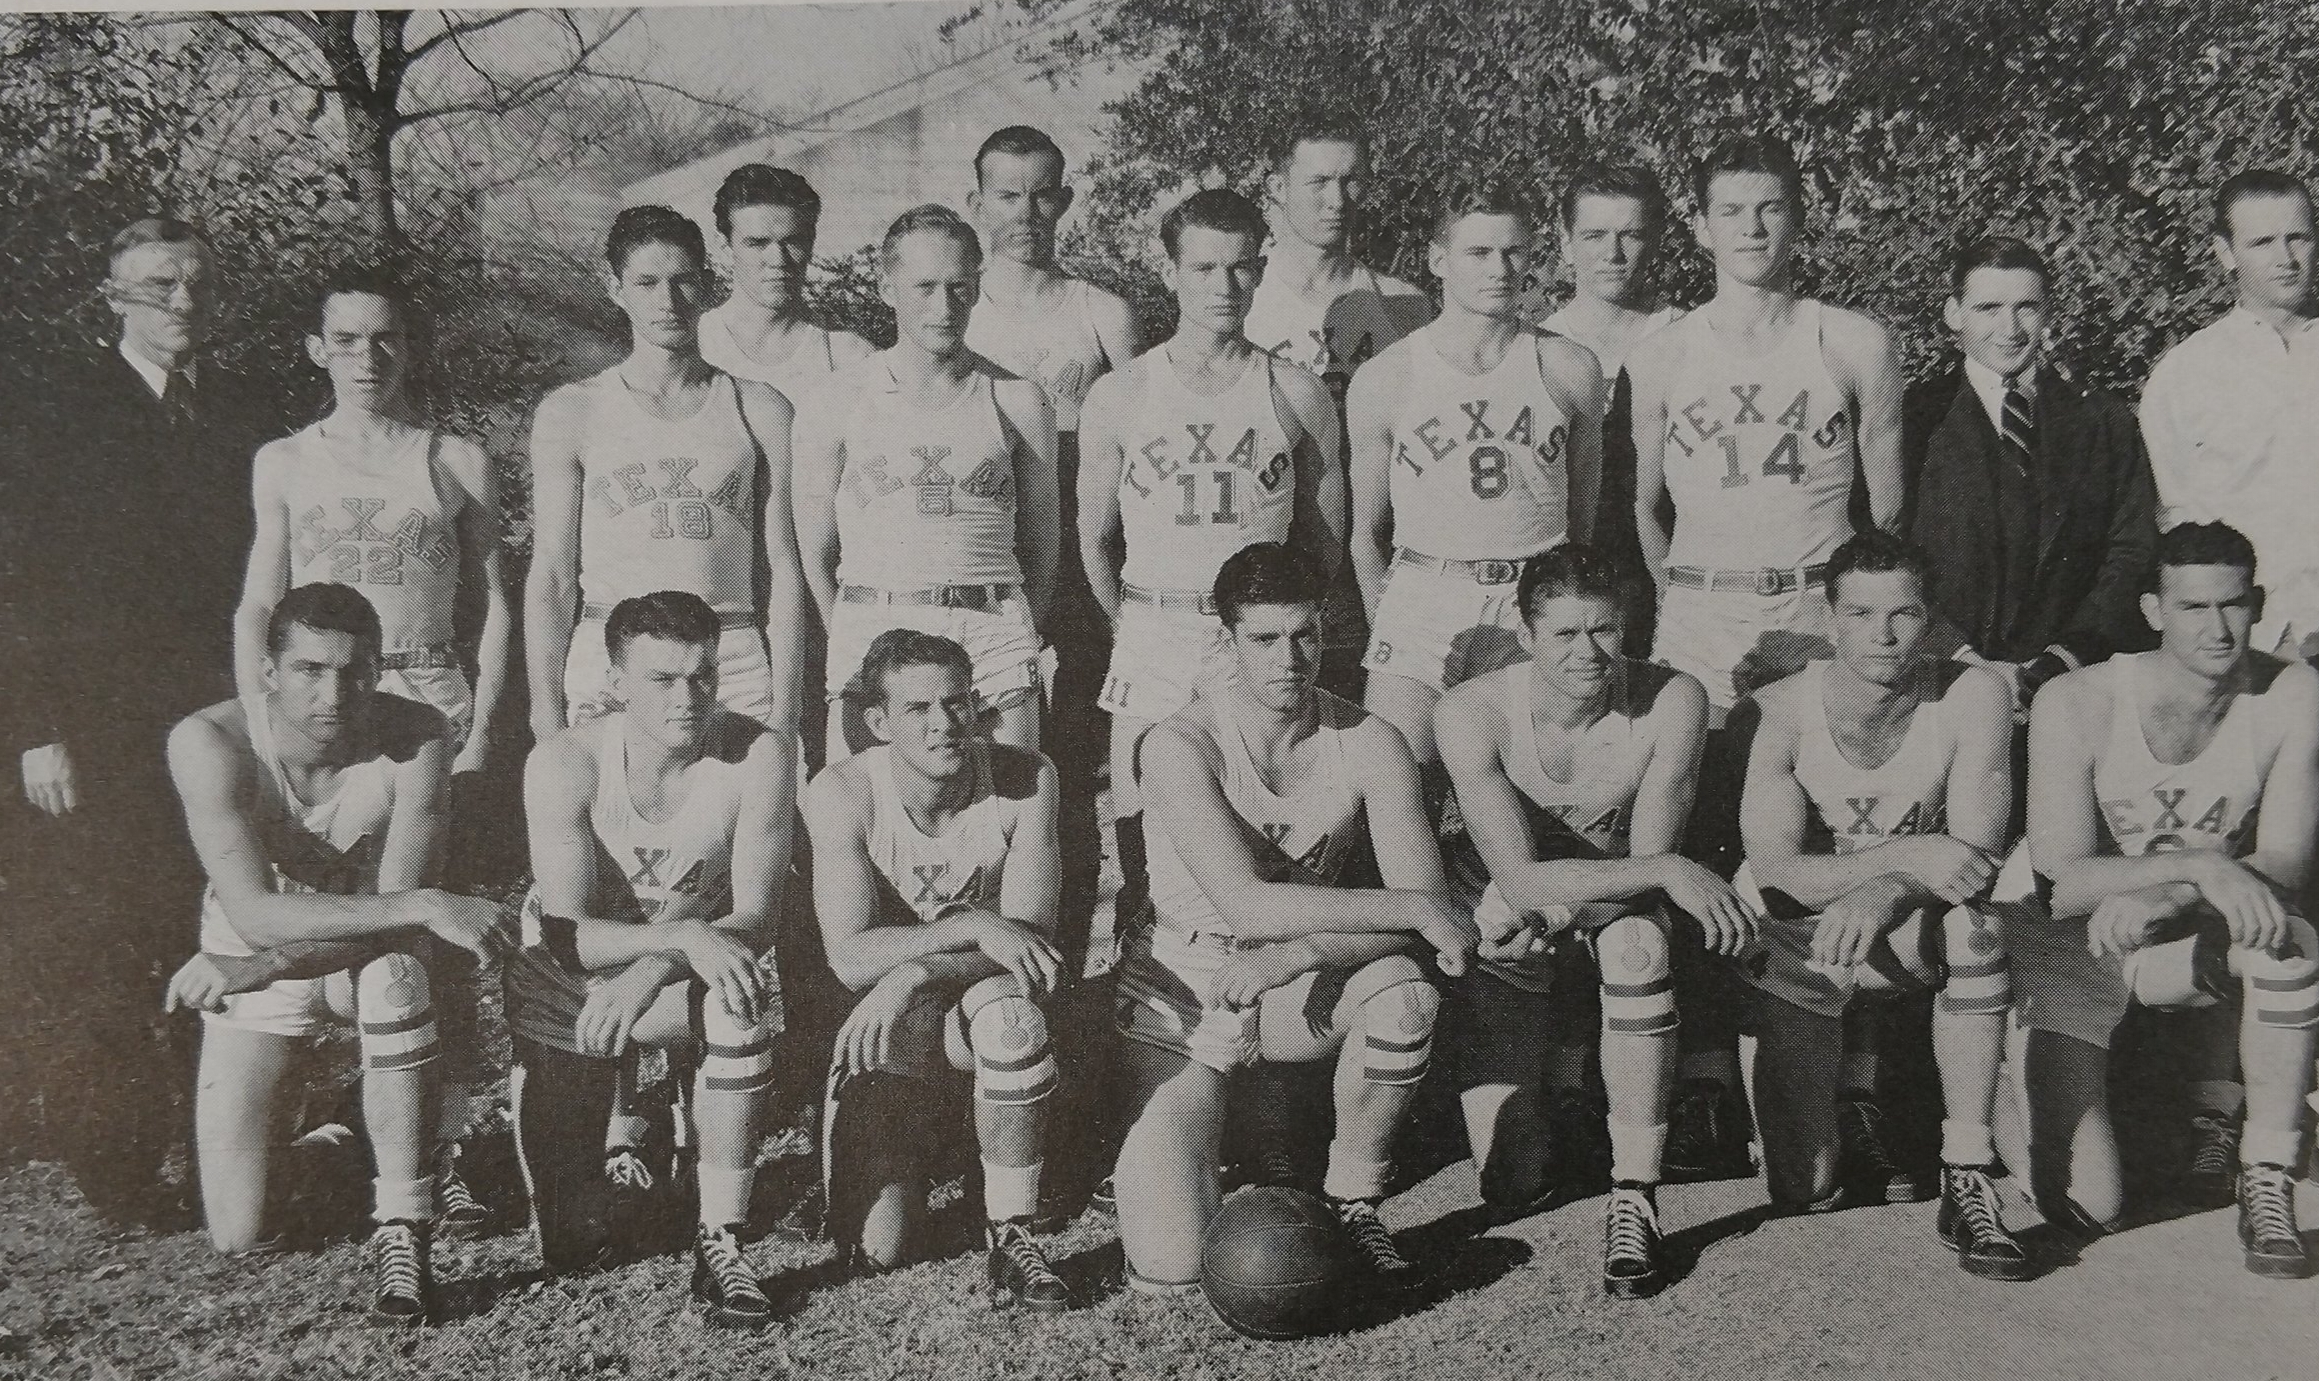 Bottom- Spears, Nelms, Moers, Tate, Finley, Wiggins, Roach second row Kelley, Greer, King, Simmons, Hull, Moore, Granville, Schwartz, Gray third row Garrison, Anderson, Houpt, Cooley  